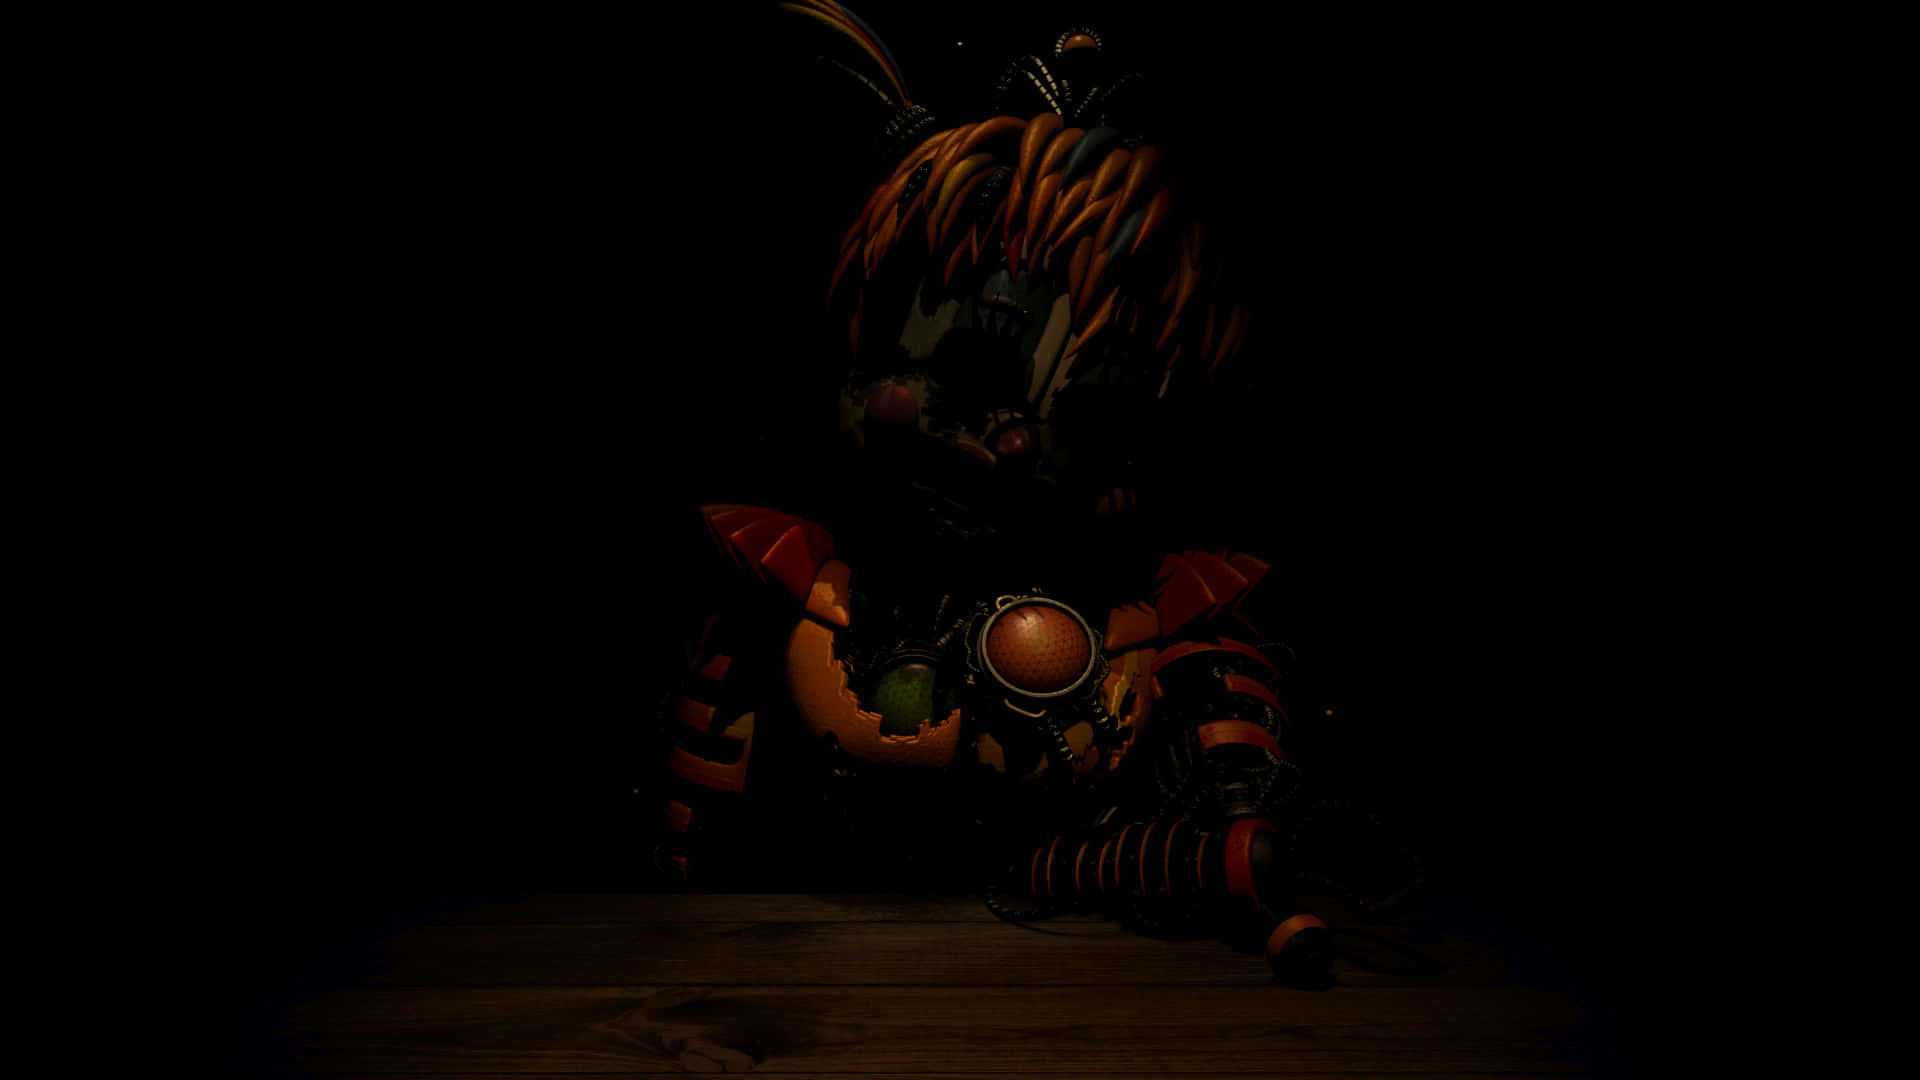 A Toy In The Dark